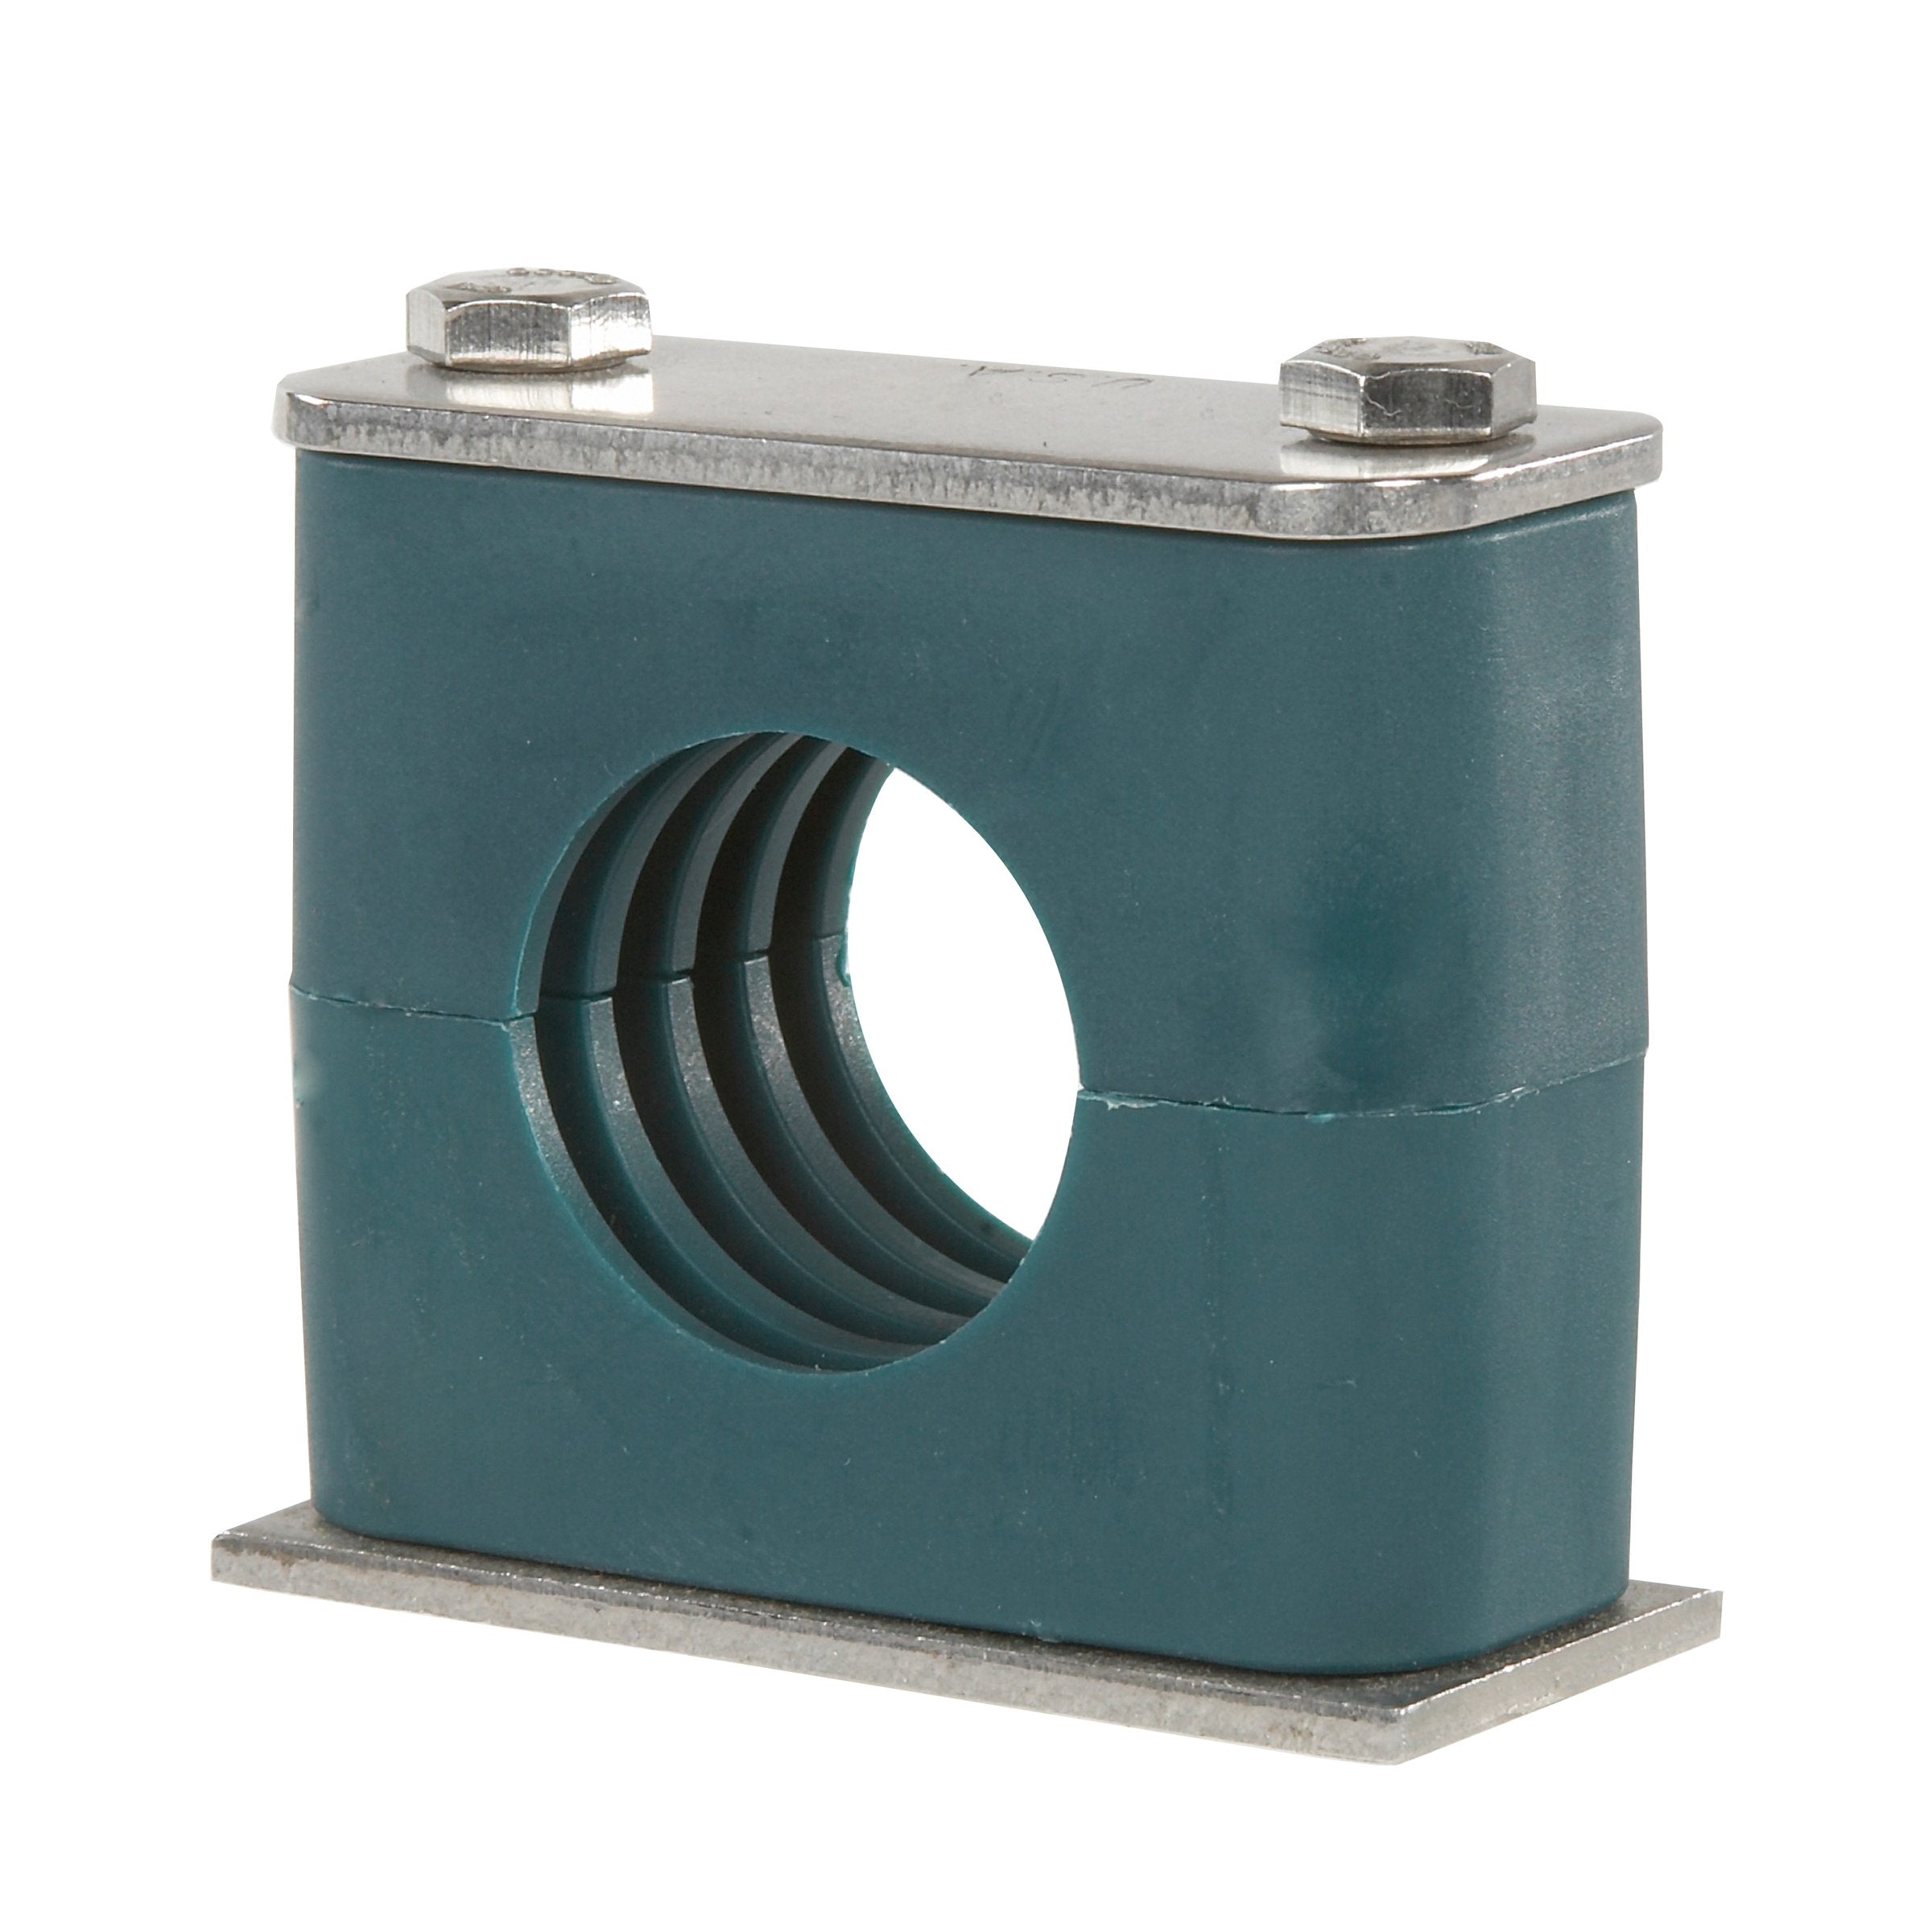 SP-212.7-PP-H-DP-AS-U-W10 : Stauff Clamp, Single Weld Plate, 0.5 inch (12.7mm) OD, for 1/2" Tube, Green PP Insert, Smooth Interior, Carbon Steel